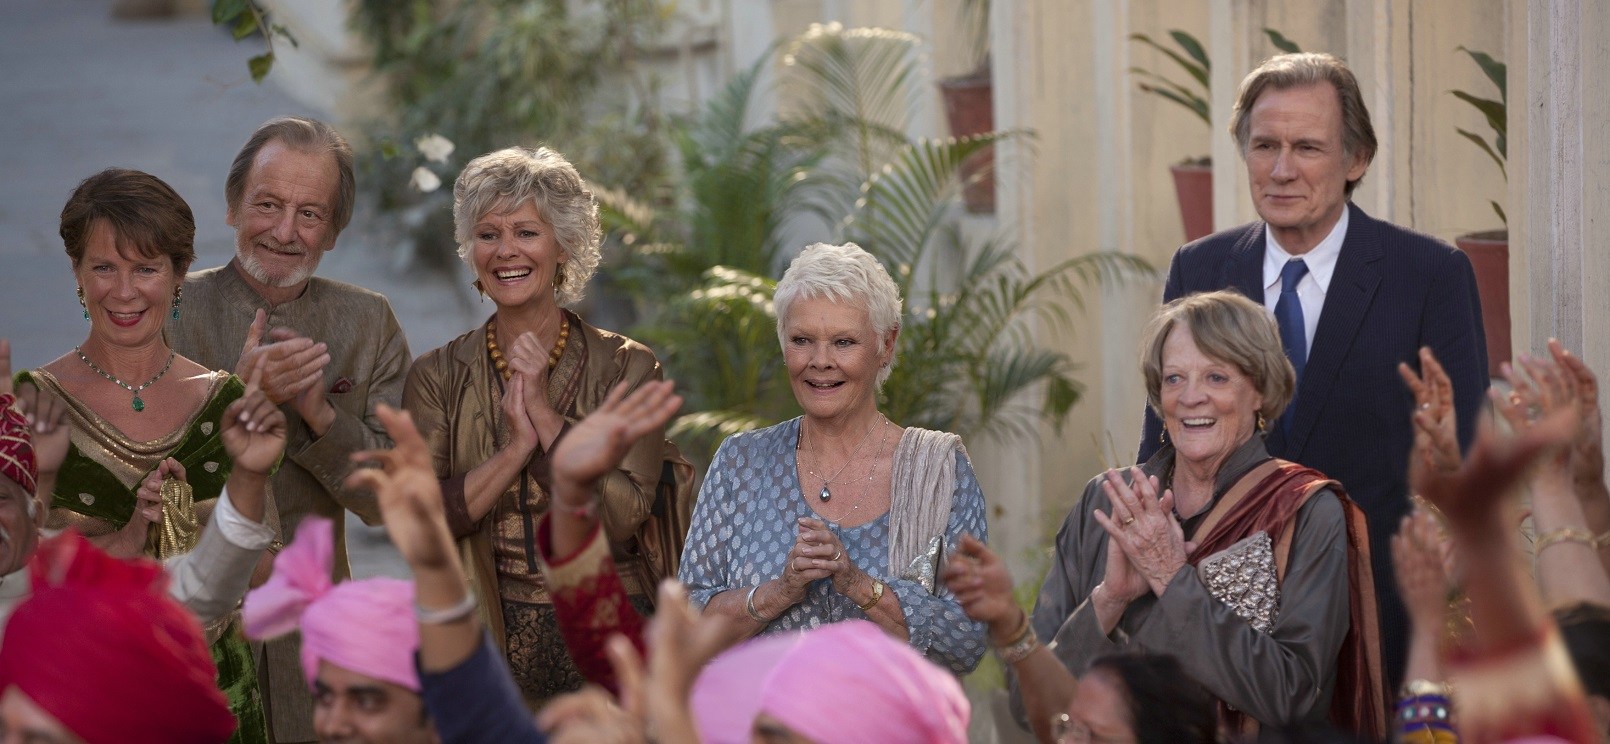 Still image from the film 'The Second Best Exotic Marigold Hotel'